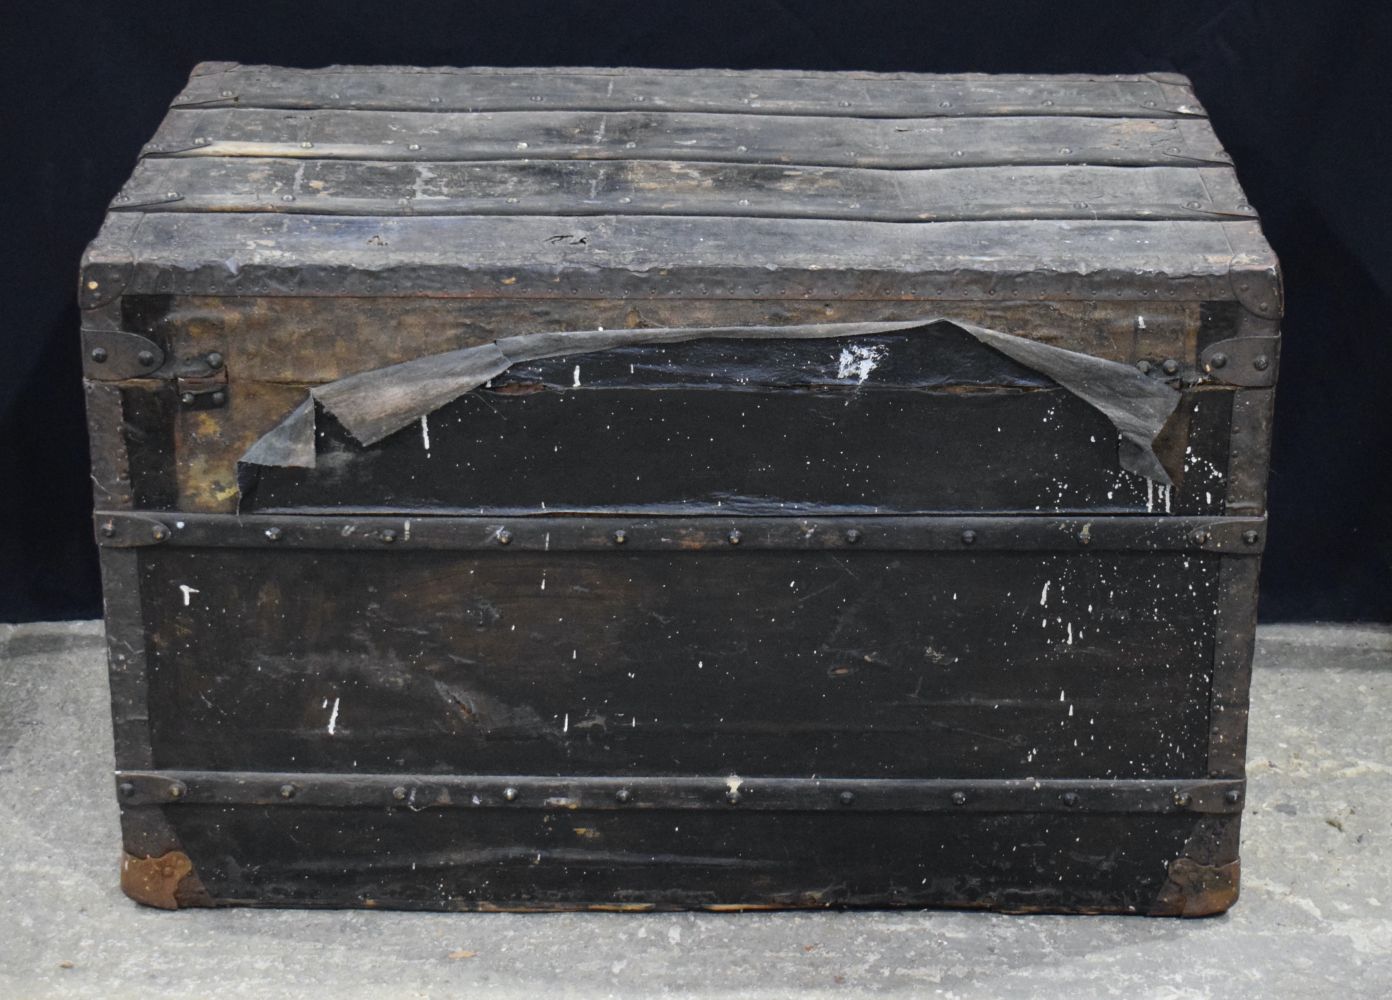 A 19th Century Louis Vuitton metal bound leather covered wooden trunk 57 x 90 x 53 cm - Image 8 of 10